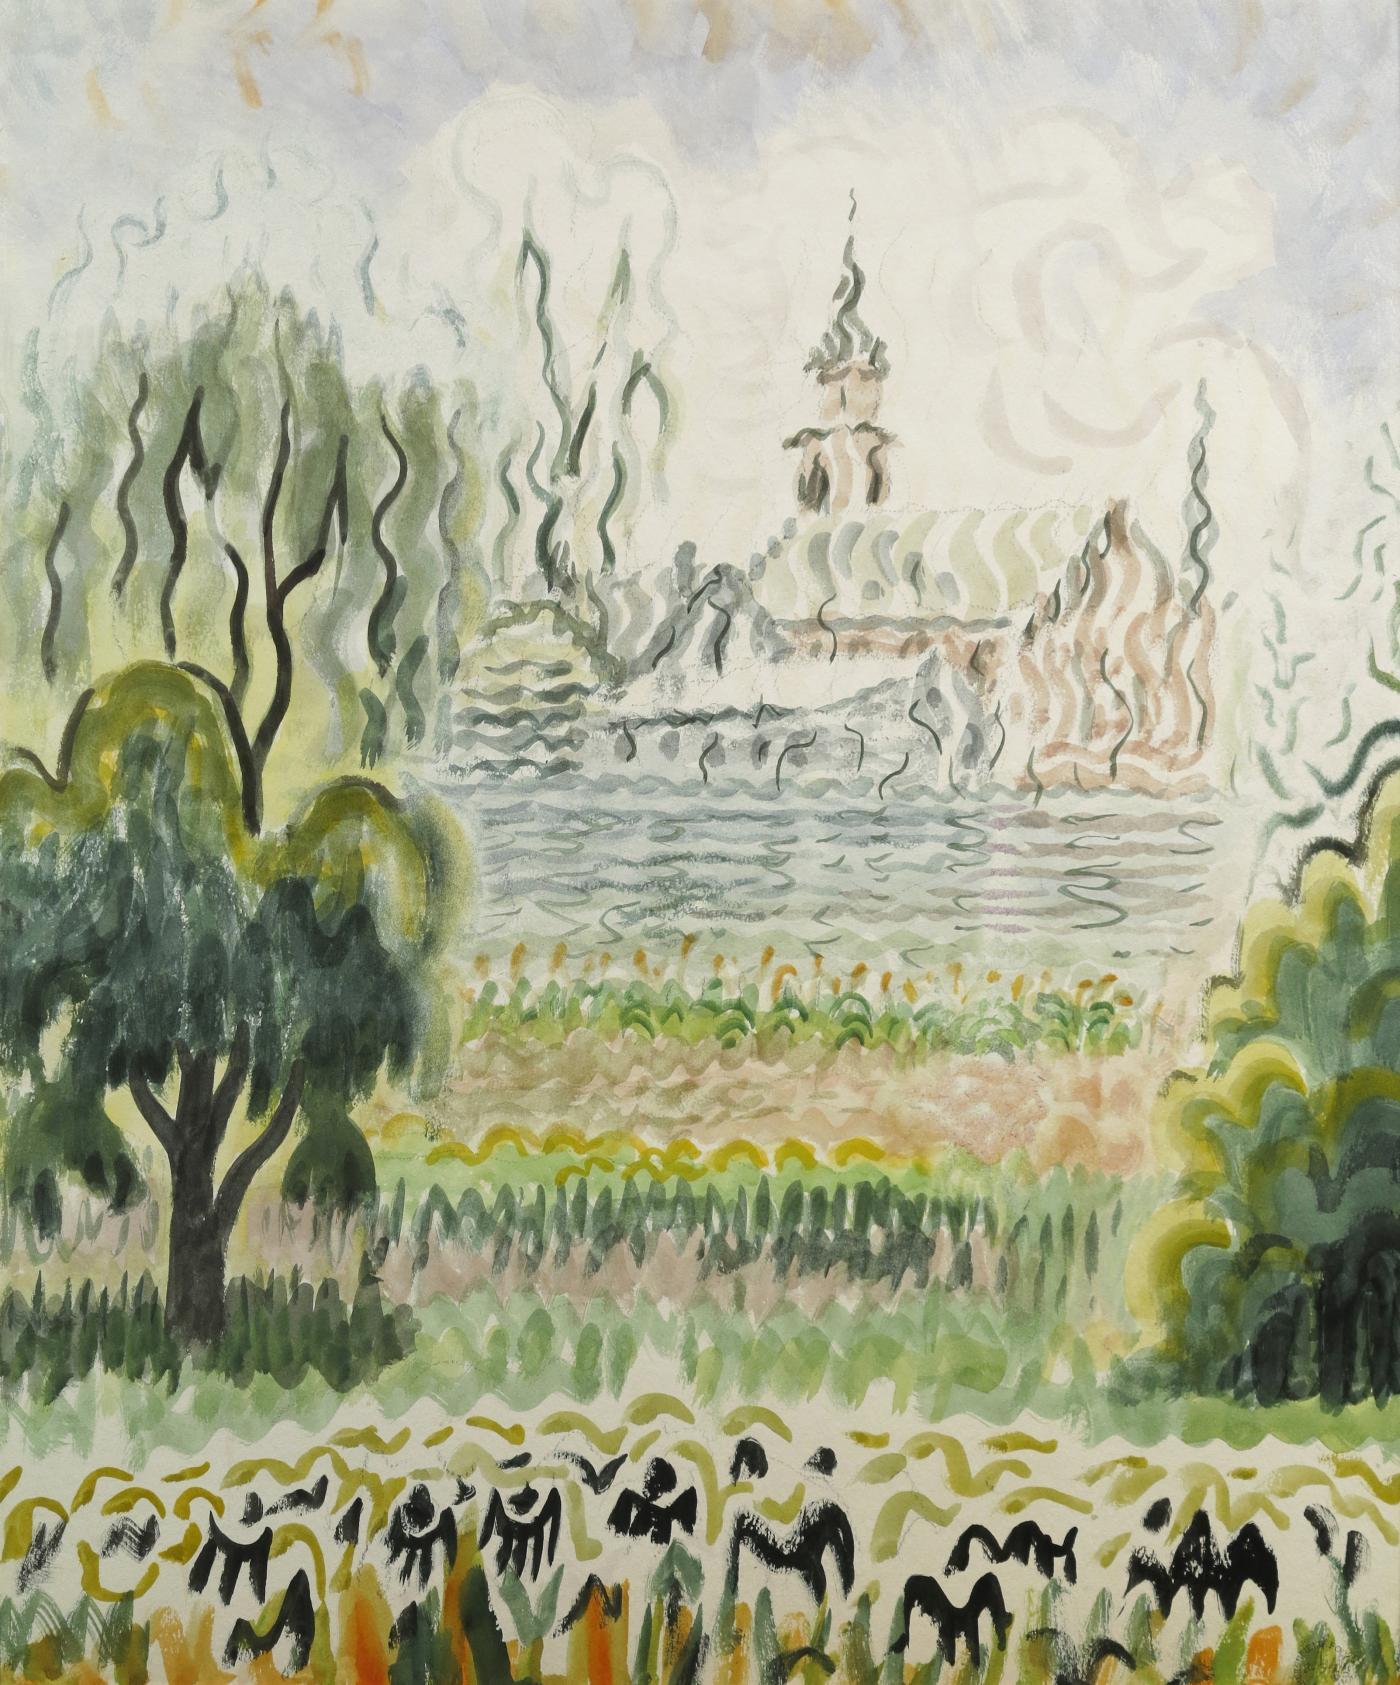 Charles Burchfield's Wallpaper Designs to Go on View at the Arkell